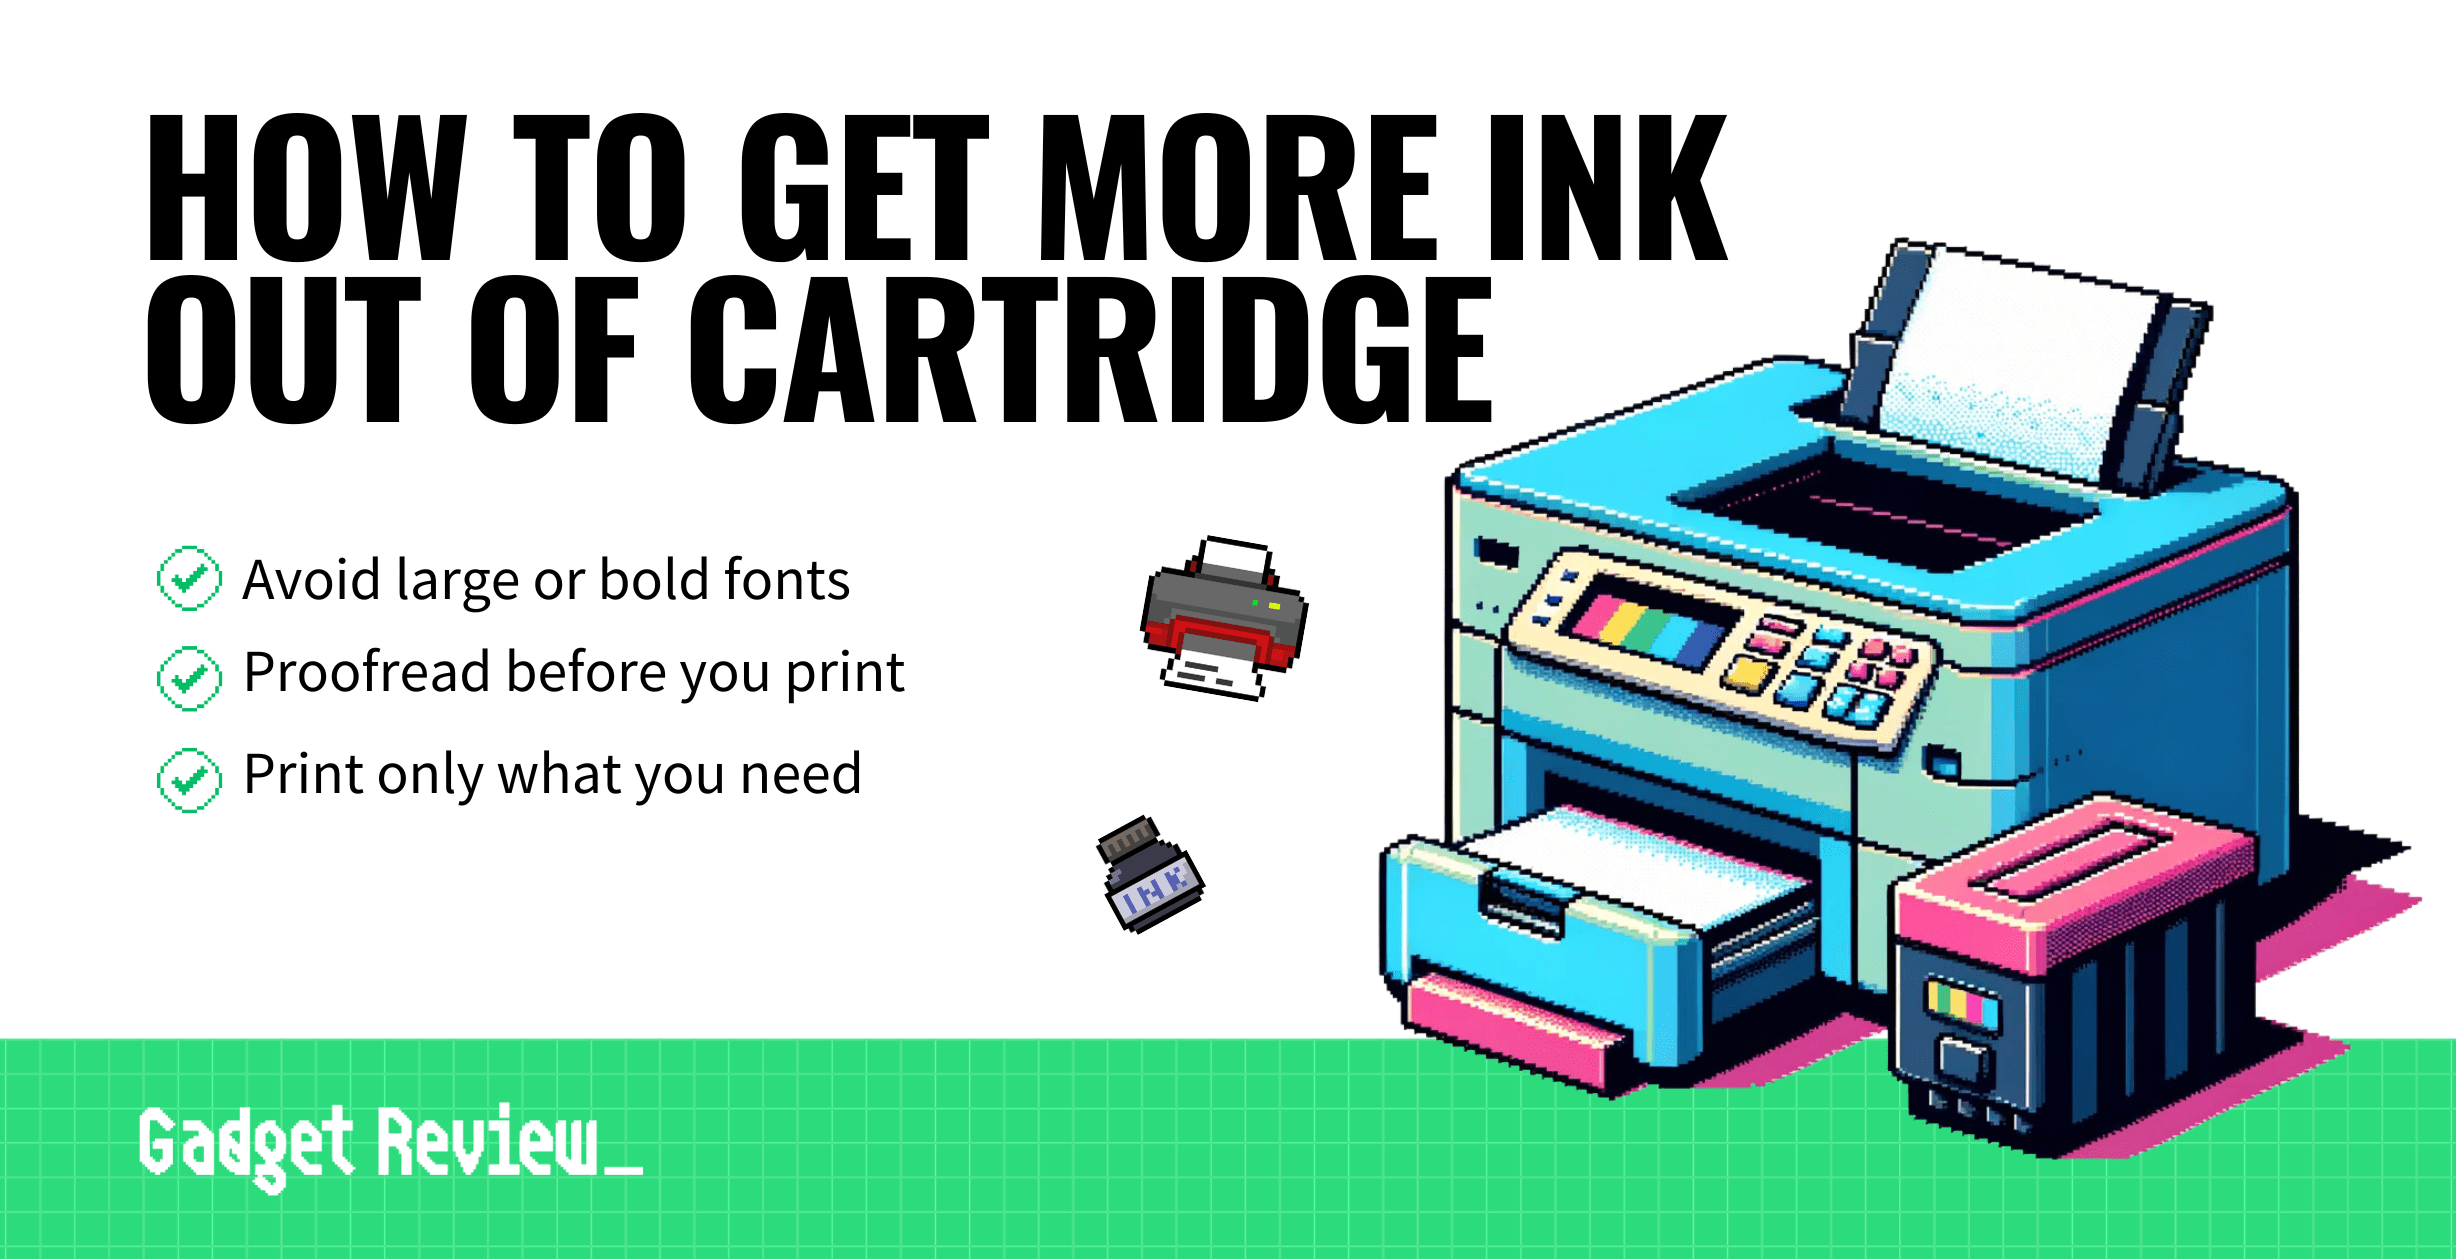 how to get more ink out of cartridge guide